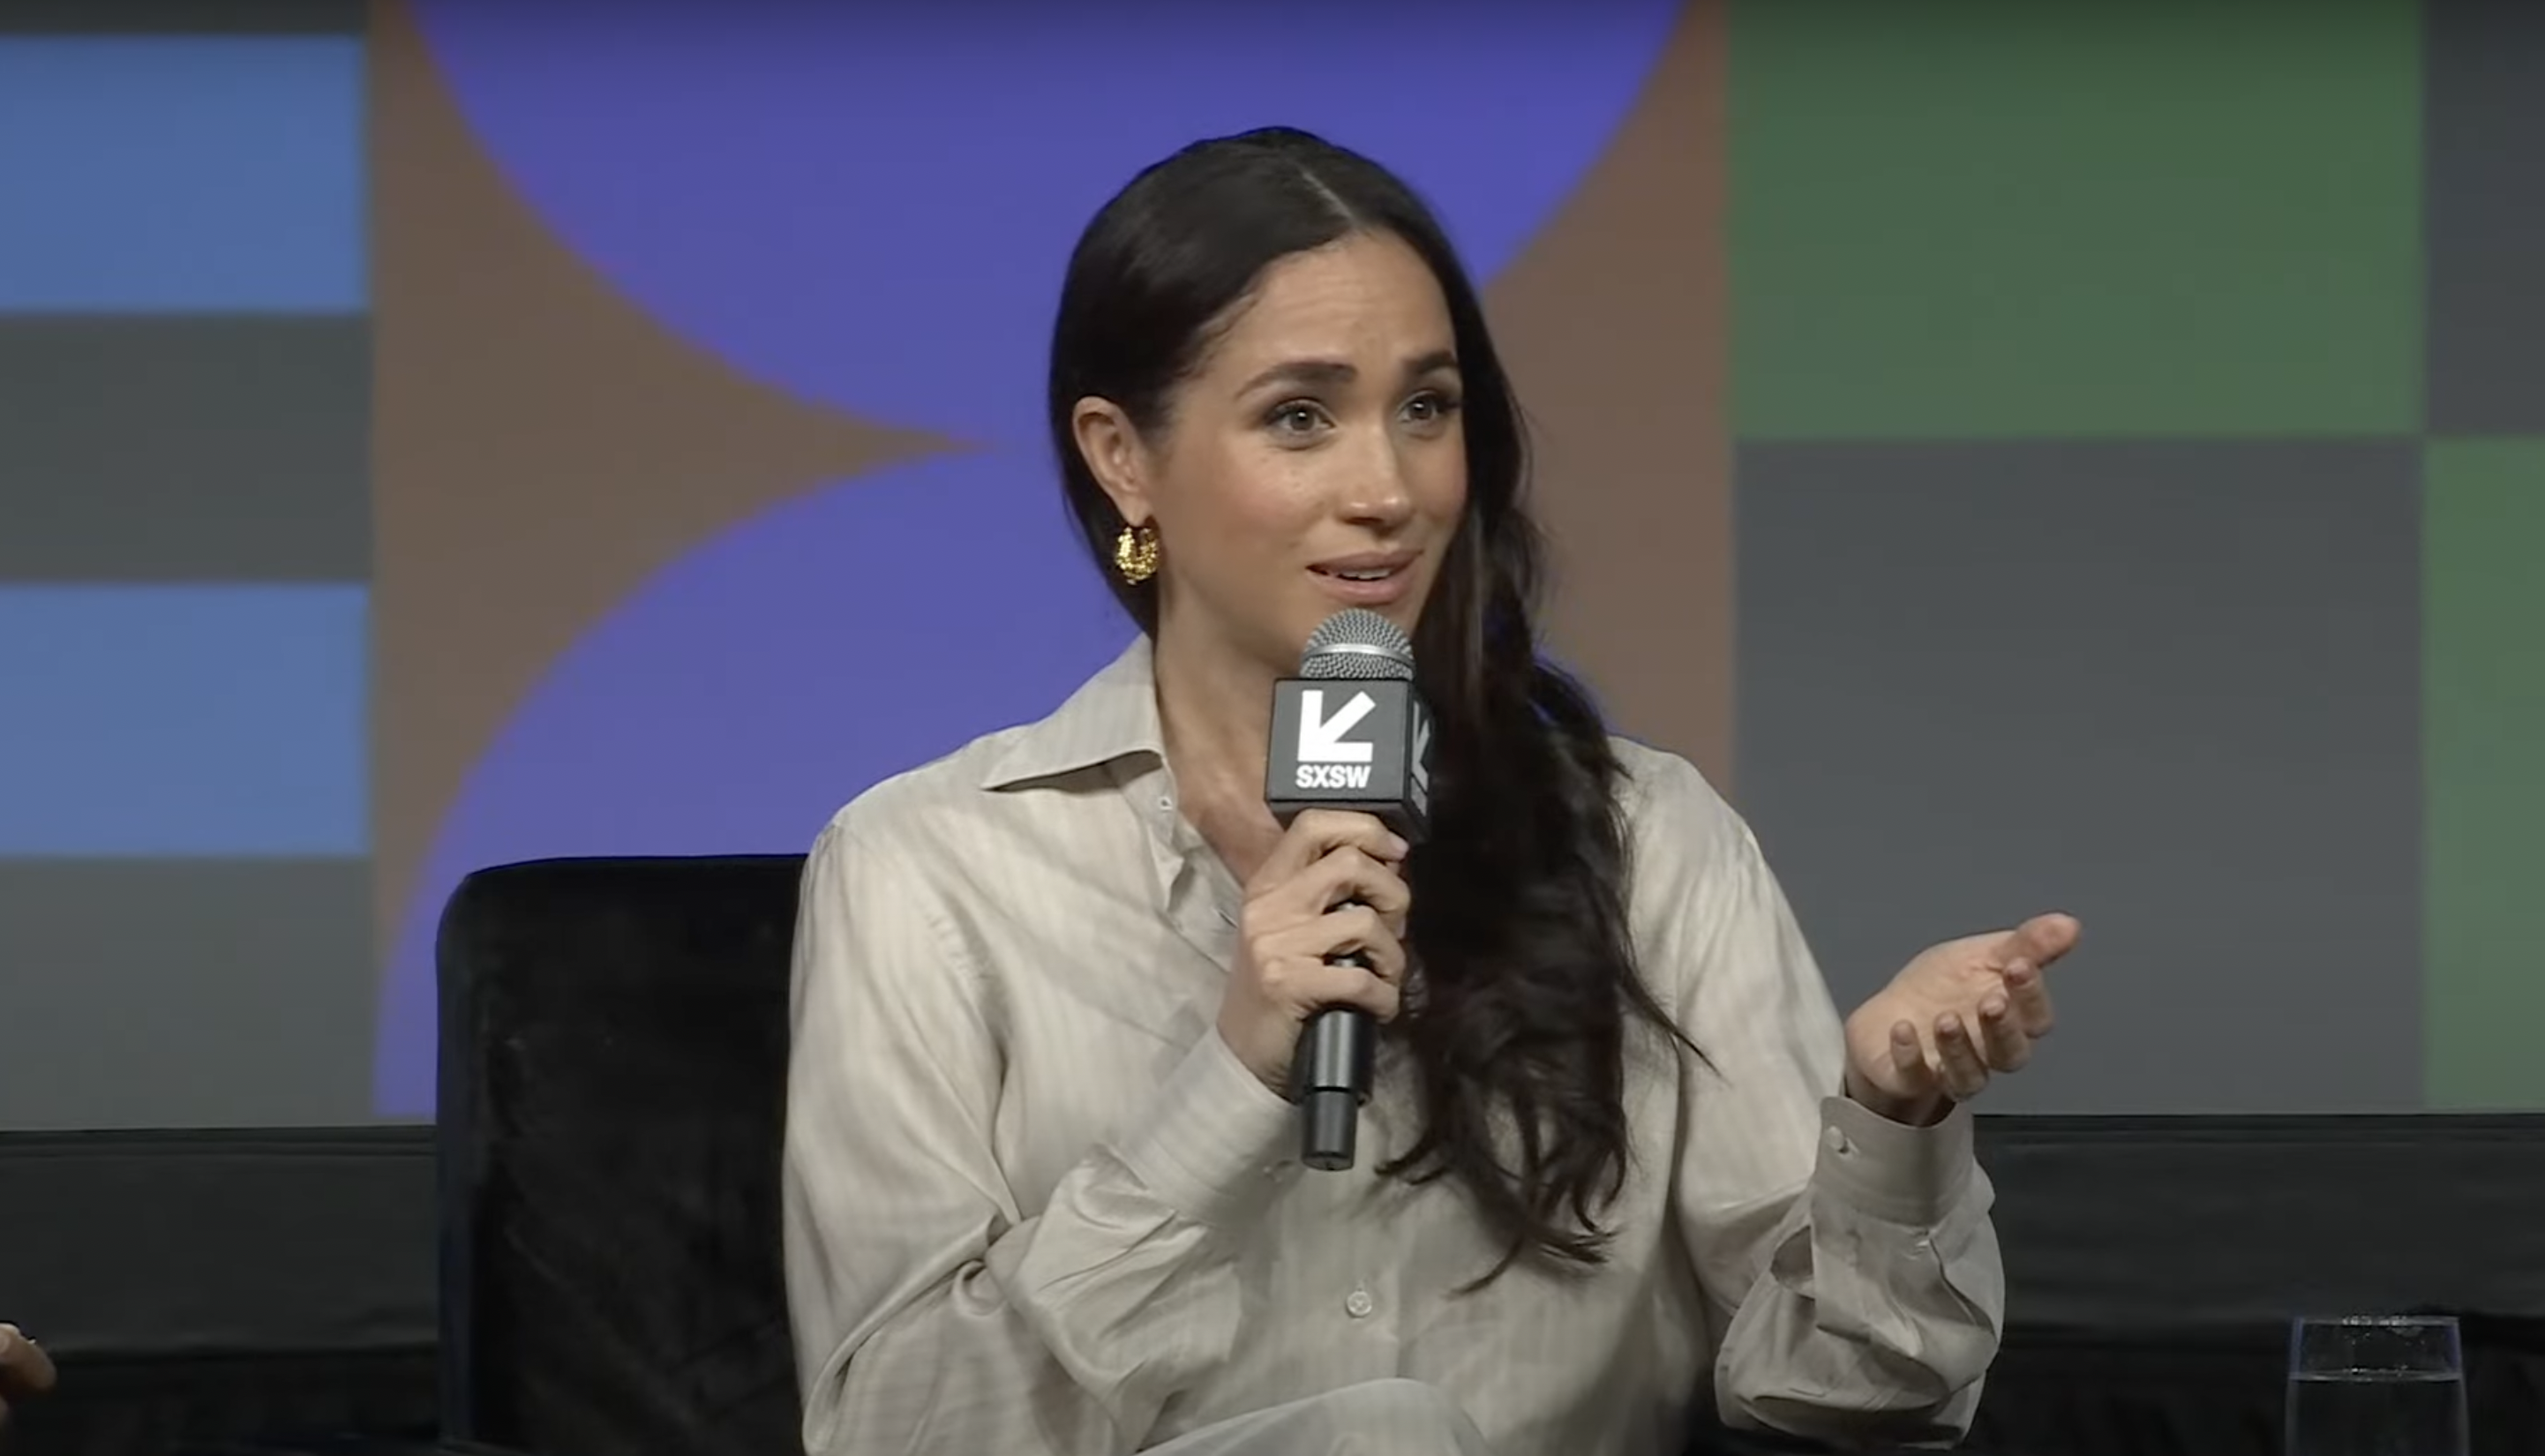 Meghan Markle bei der Veranstaltung "Breaking Barriers, Shaping Narratives: How Women Lead On and Off the Screen" während der 2024 SXSW Conference and Festival im Austin Convention Center am 8. März 2024 in Austin, Texas. | Quelle: Youtube/SXSW